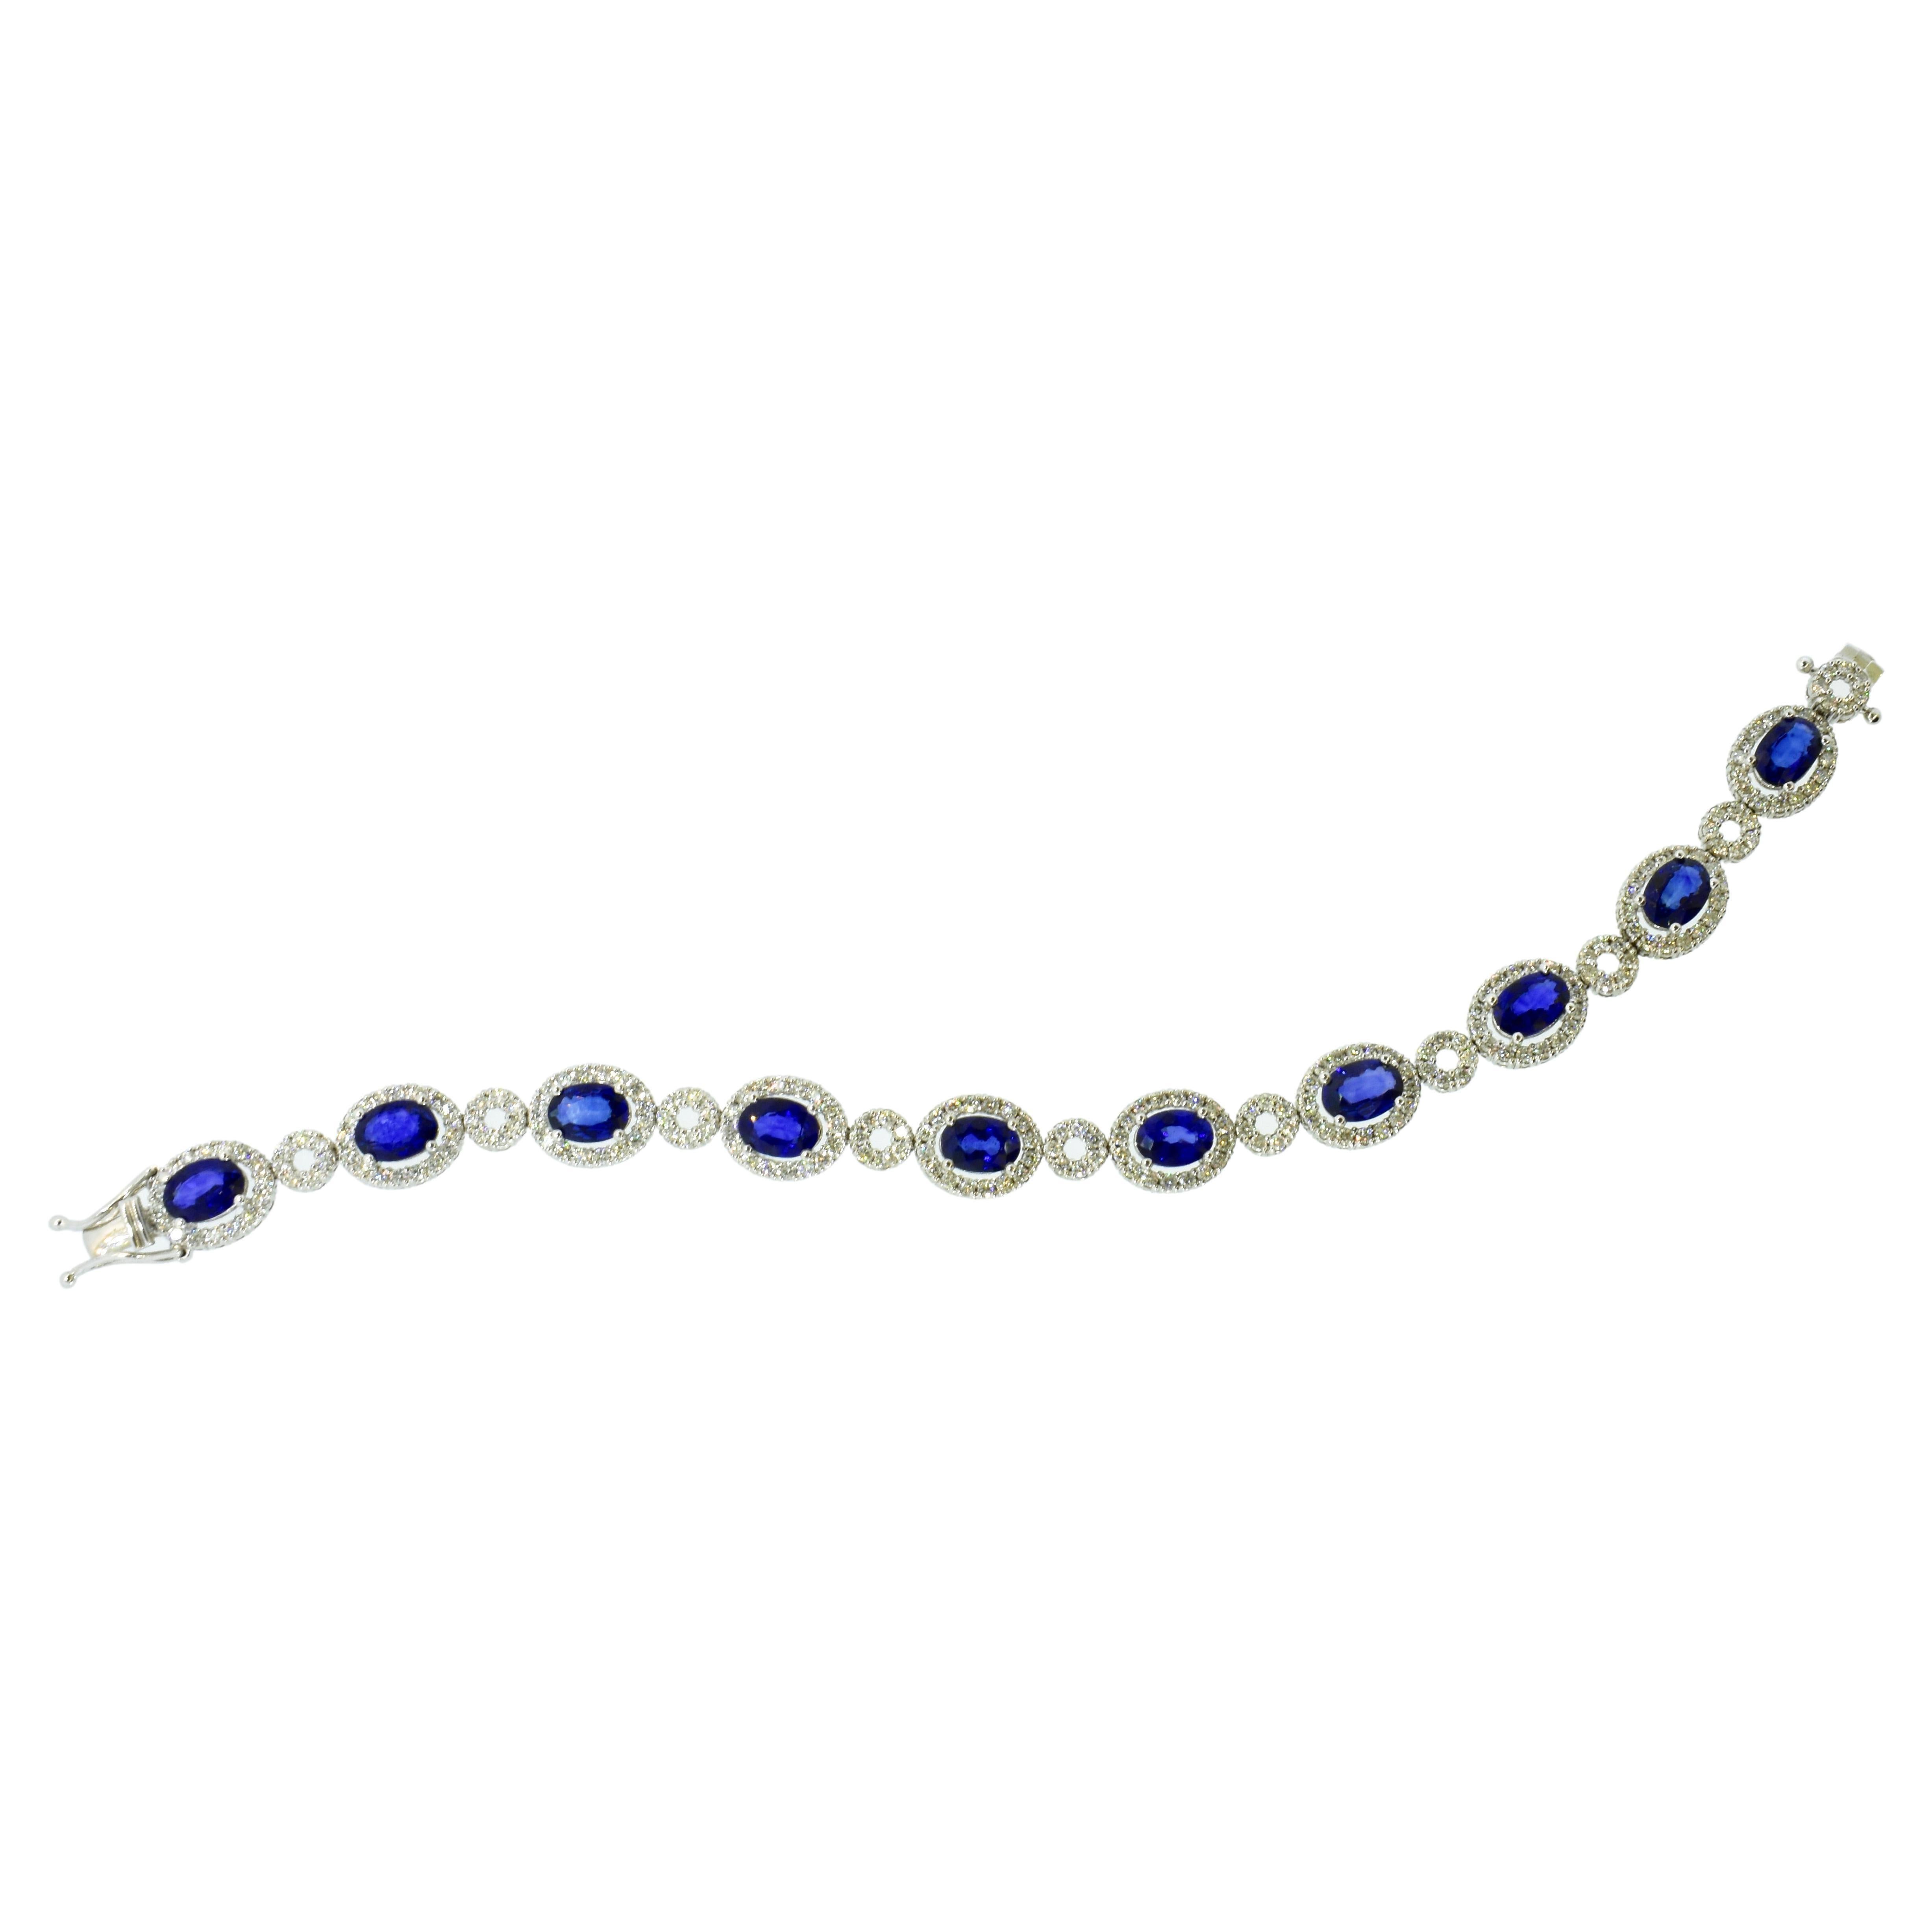 Diamond and fine natural sapphire contemporary bracelet. This well made white gold bracelet possesses 10 fine natural vivid blue oval sapphires. These stones exhibit a clear blue color with no undesirable undertones - such as green, and the clarity